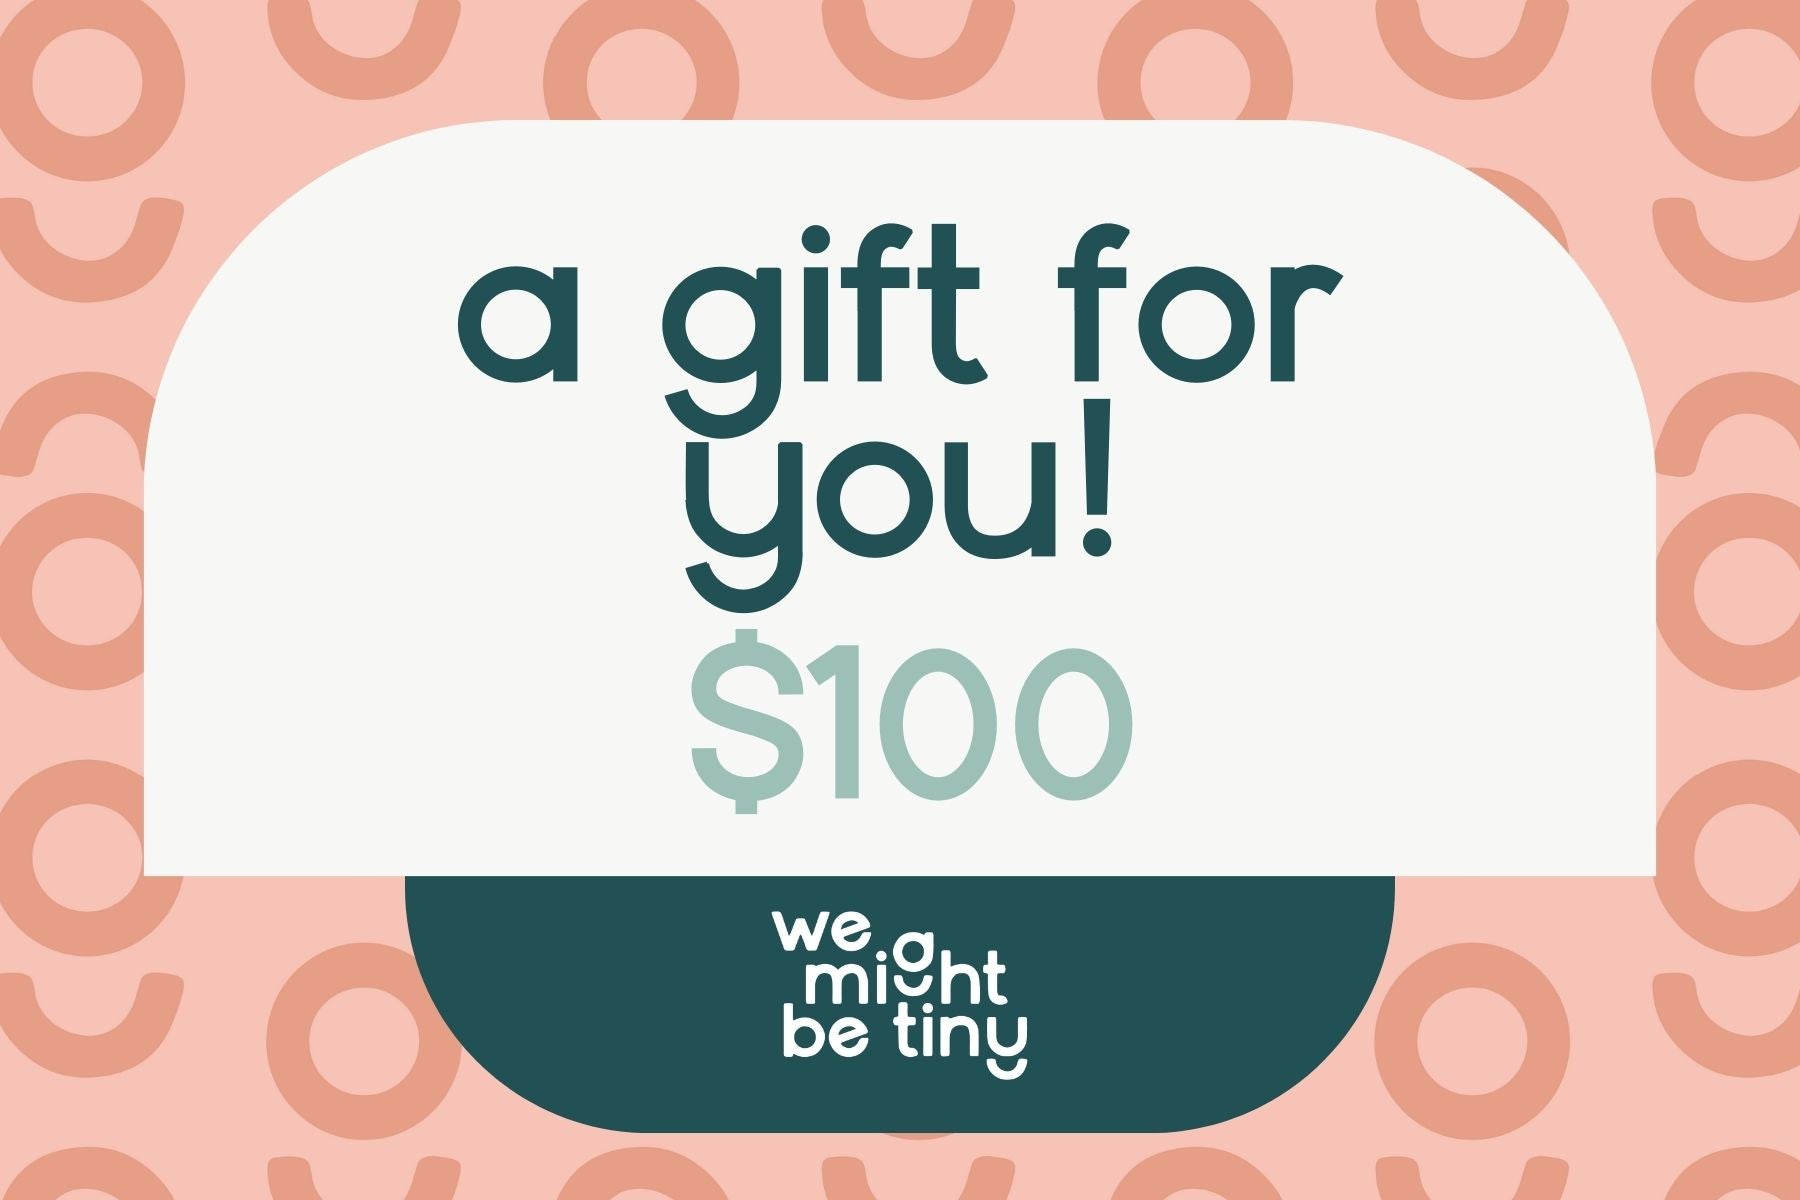 Gift Voucher - We Might Be Tiny $100